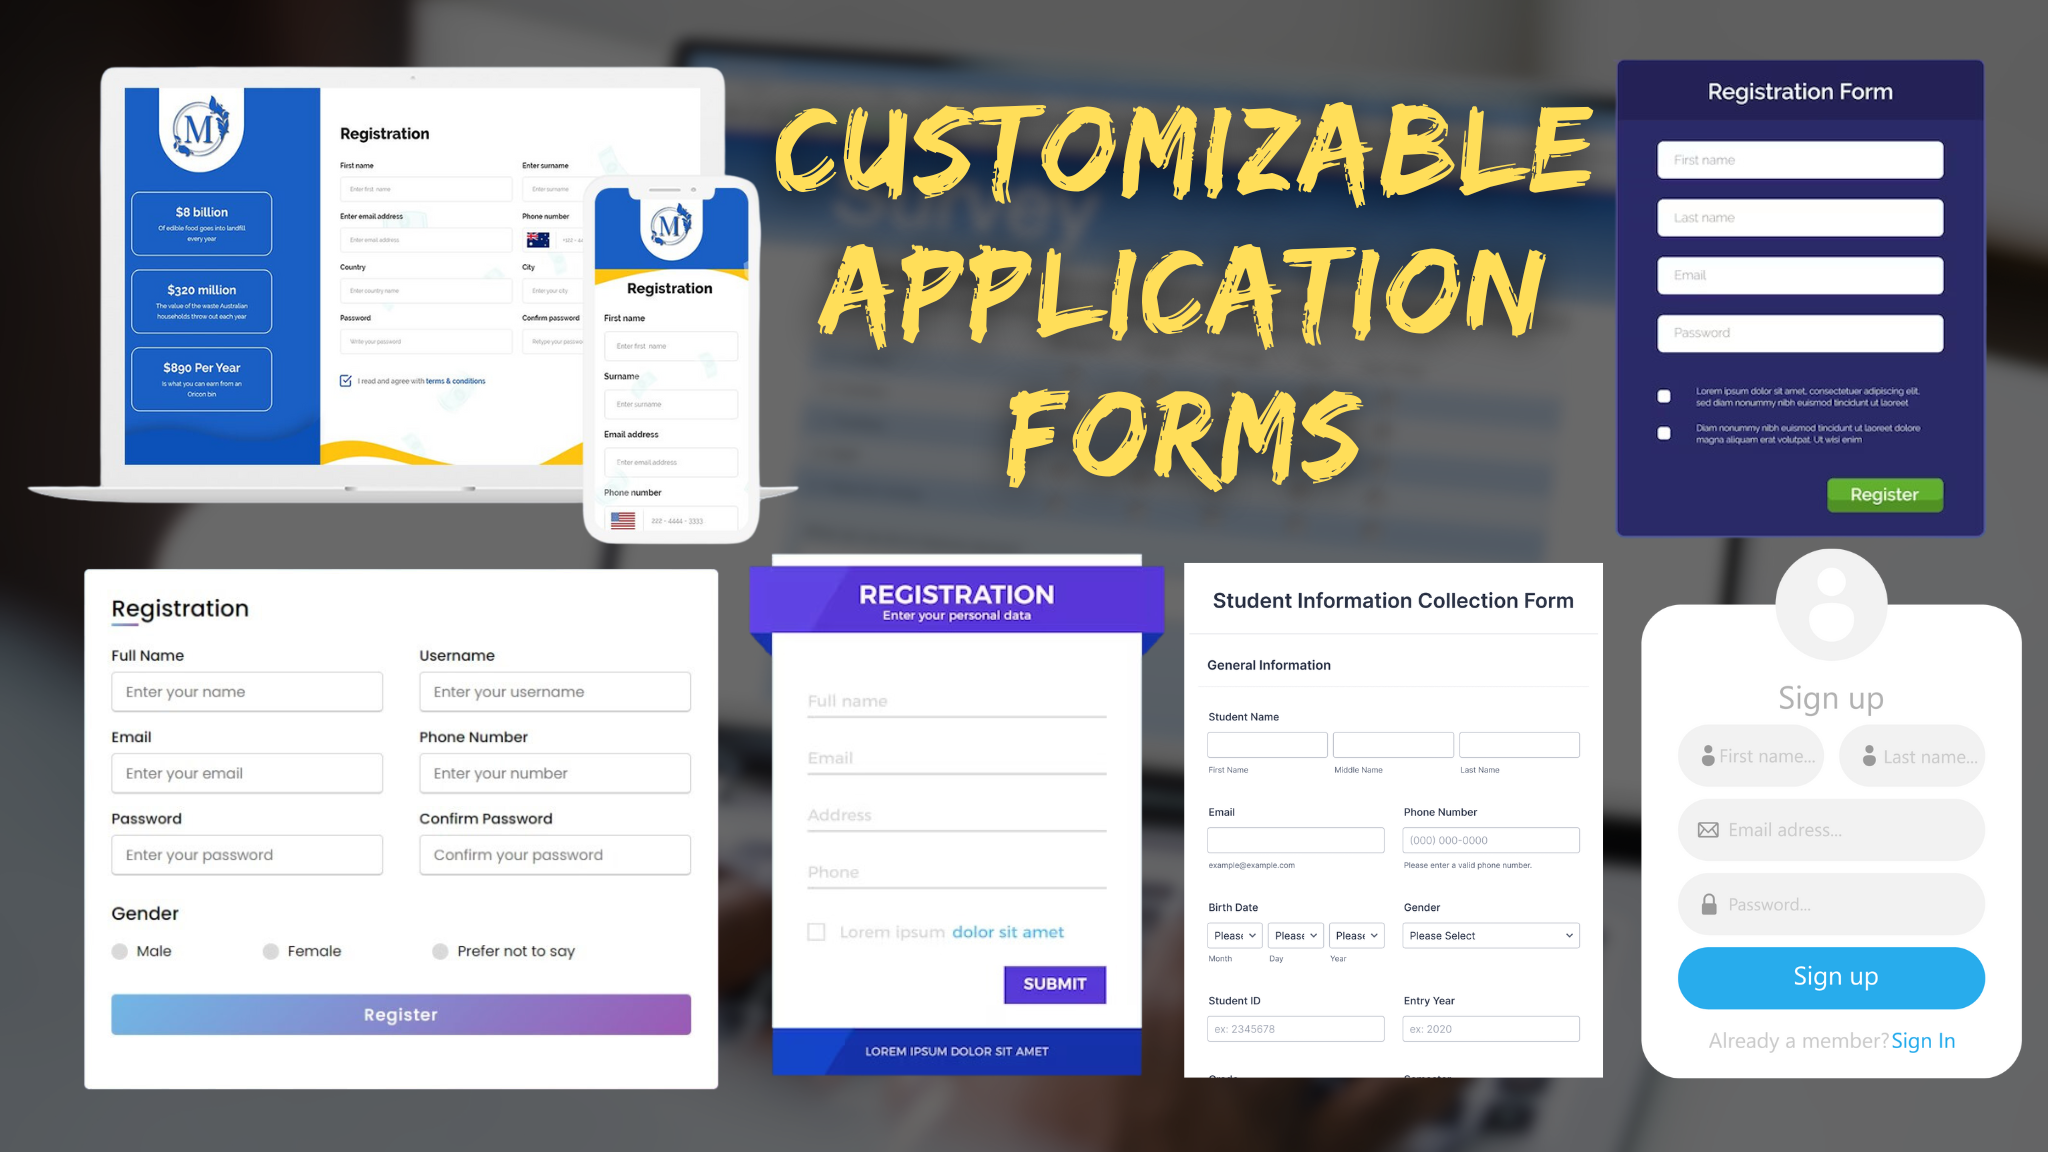 Customizable Application Forms